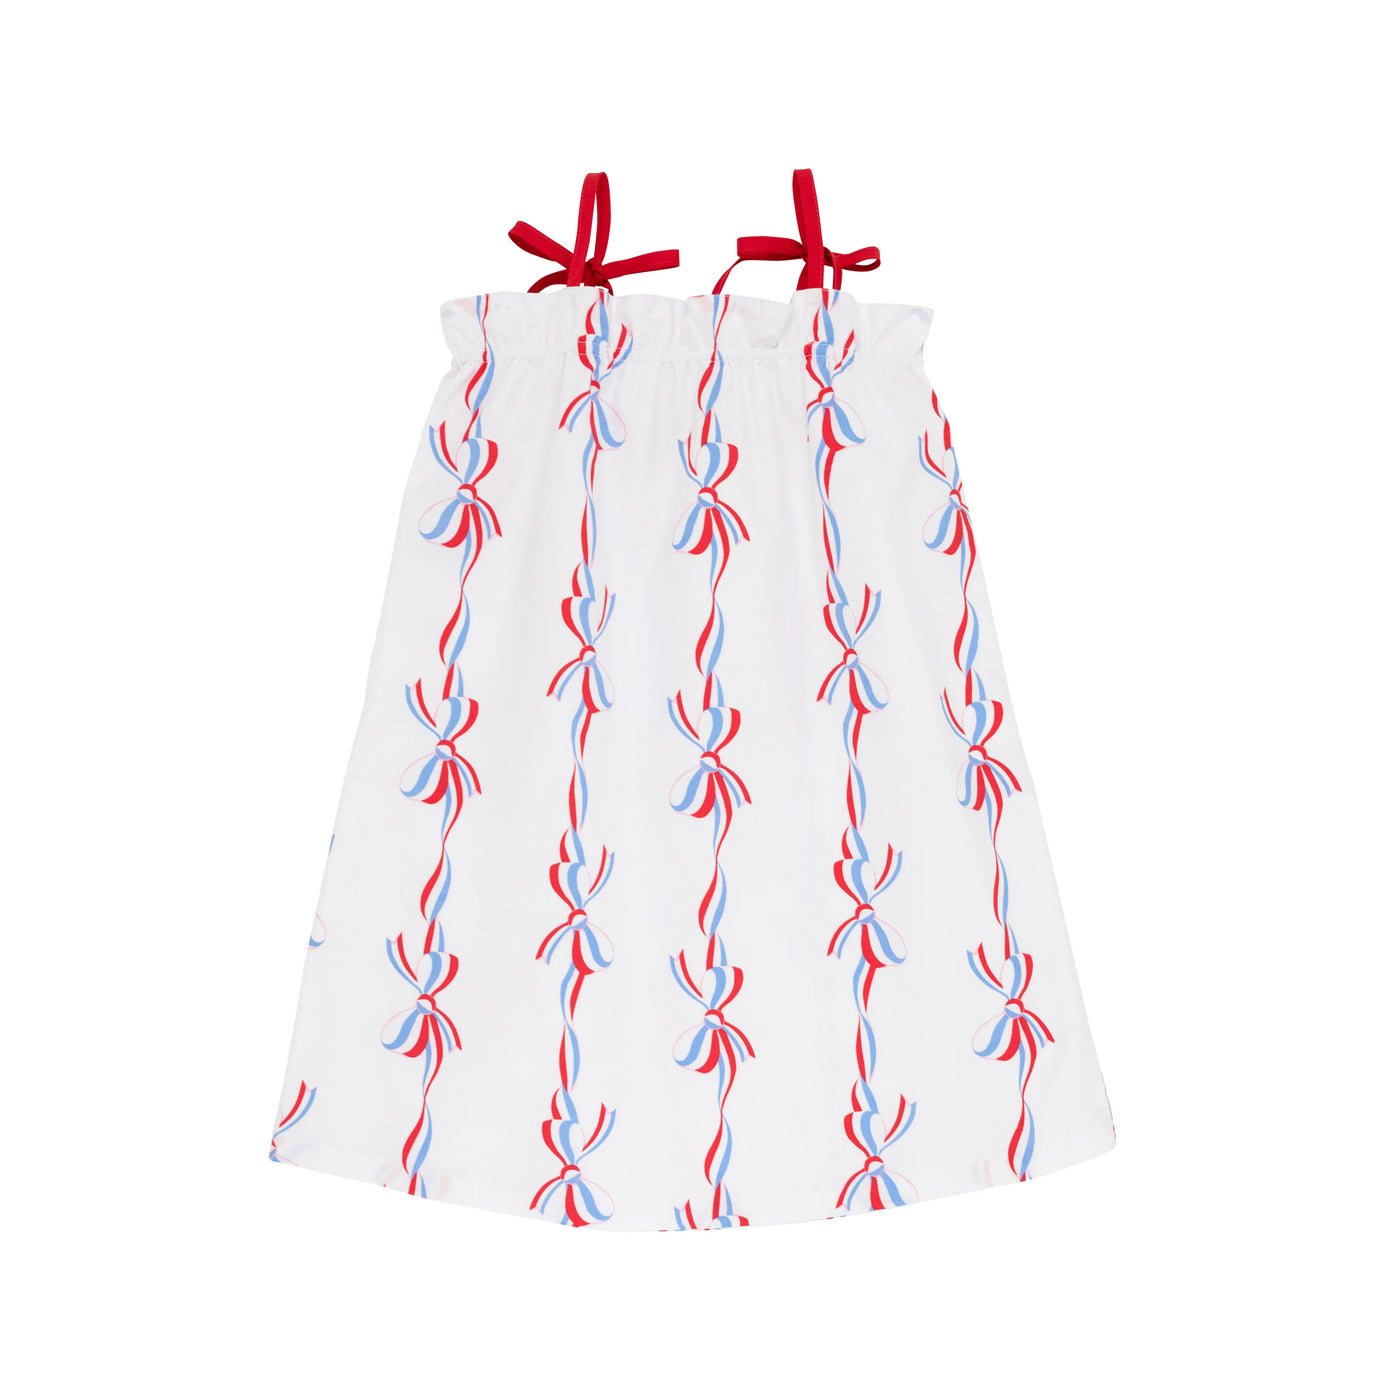 Laineys Little Dress - America's Birthday Bows With Richmond Red